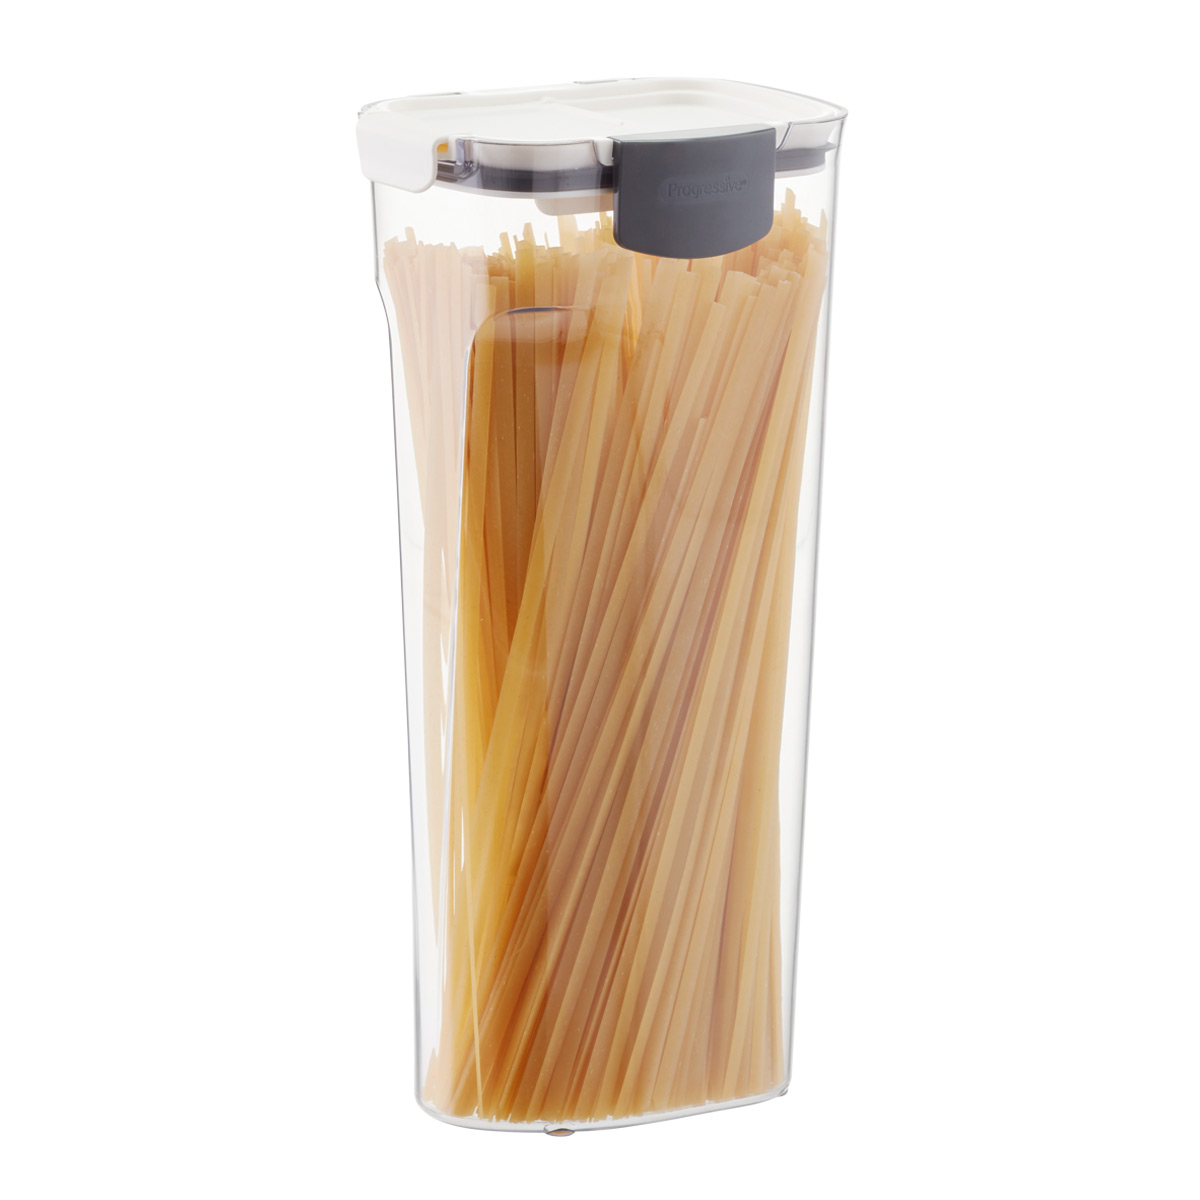 https://www.containerstore.com/catalogimages/316064/10071673-prokeeper-pasta-container.jpg